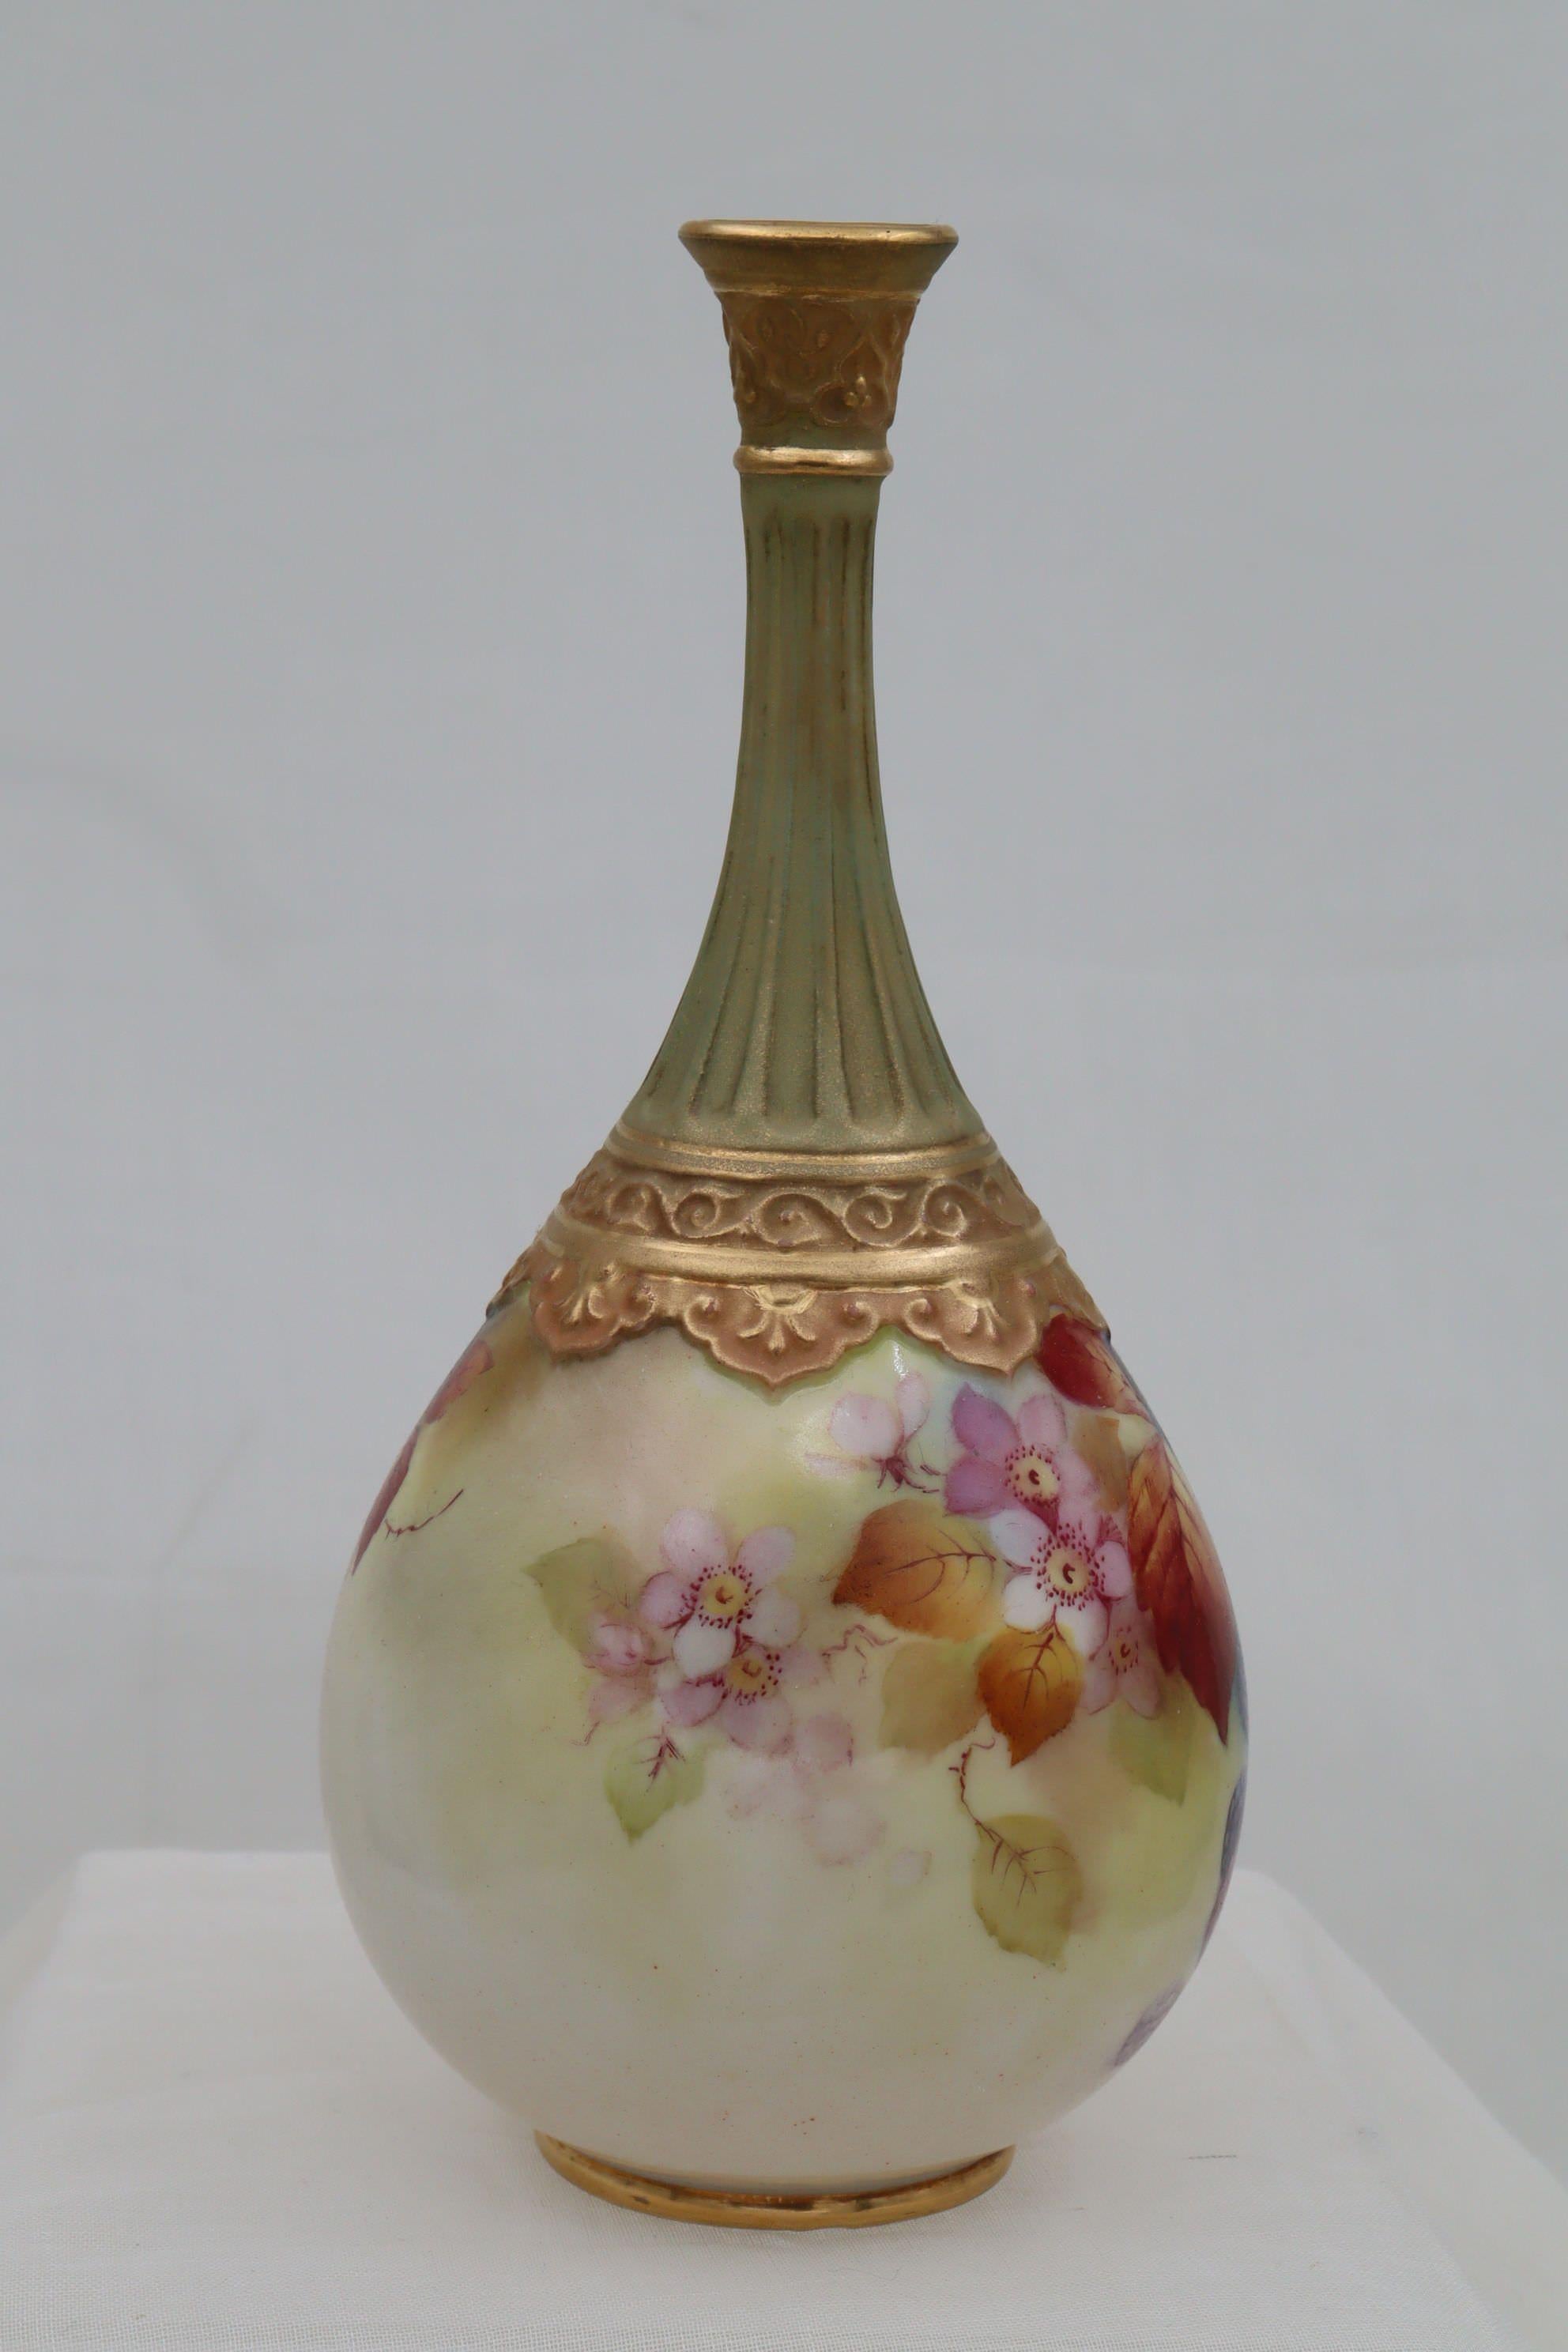 This Royal Worcester pear shaped vase with decorative gold mounts, was hand painted by Kitty Blake, with her signature motif of blackberries and autumnal leaves.  Kitty Blake worked at the Royal Worcester factory for 48 years from 1905 to 1953,